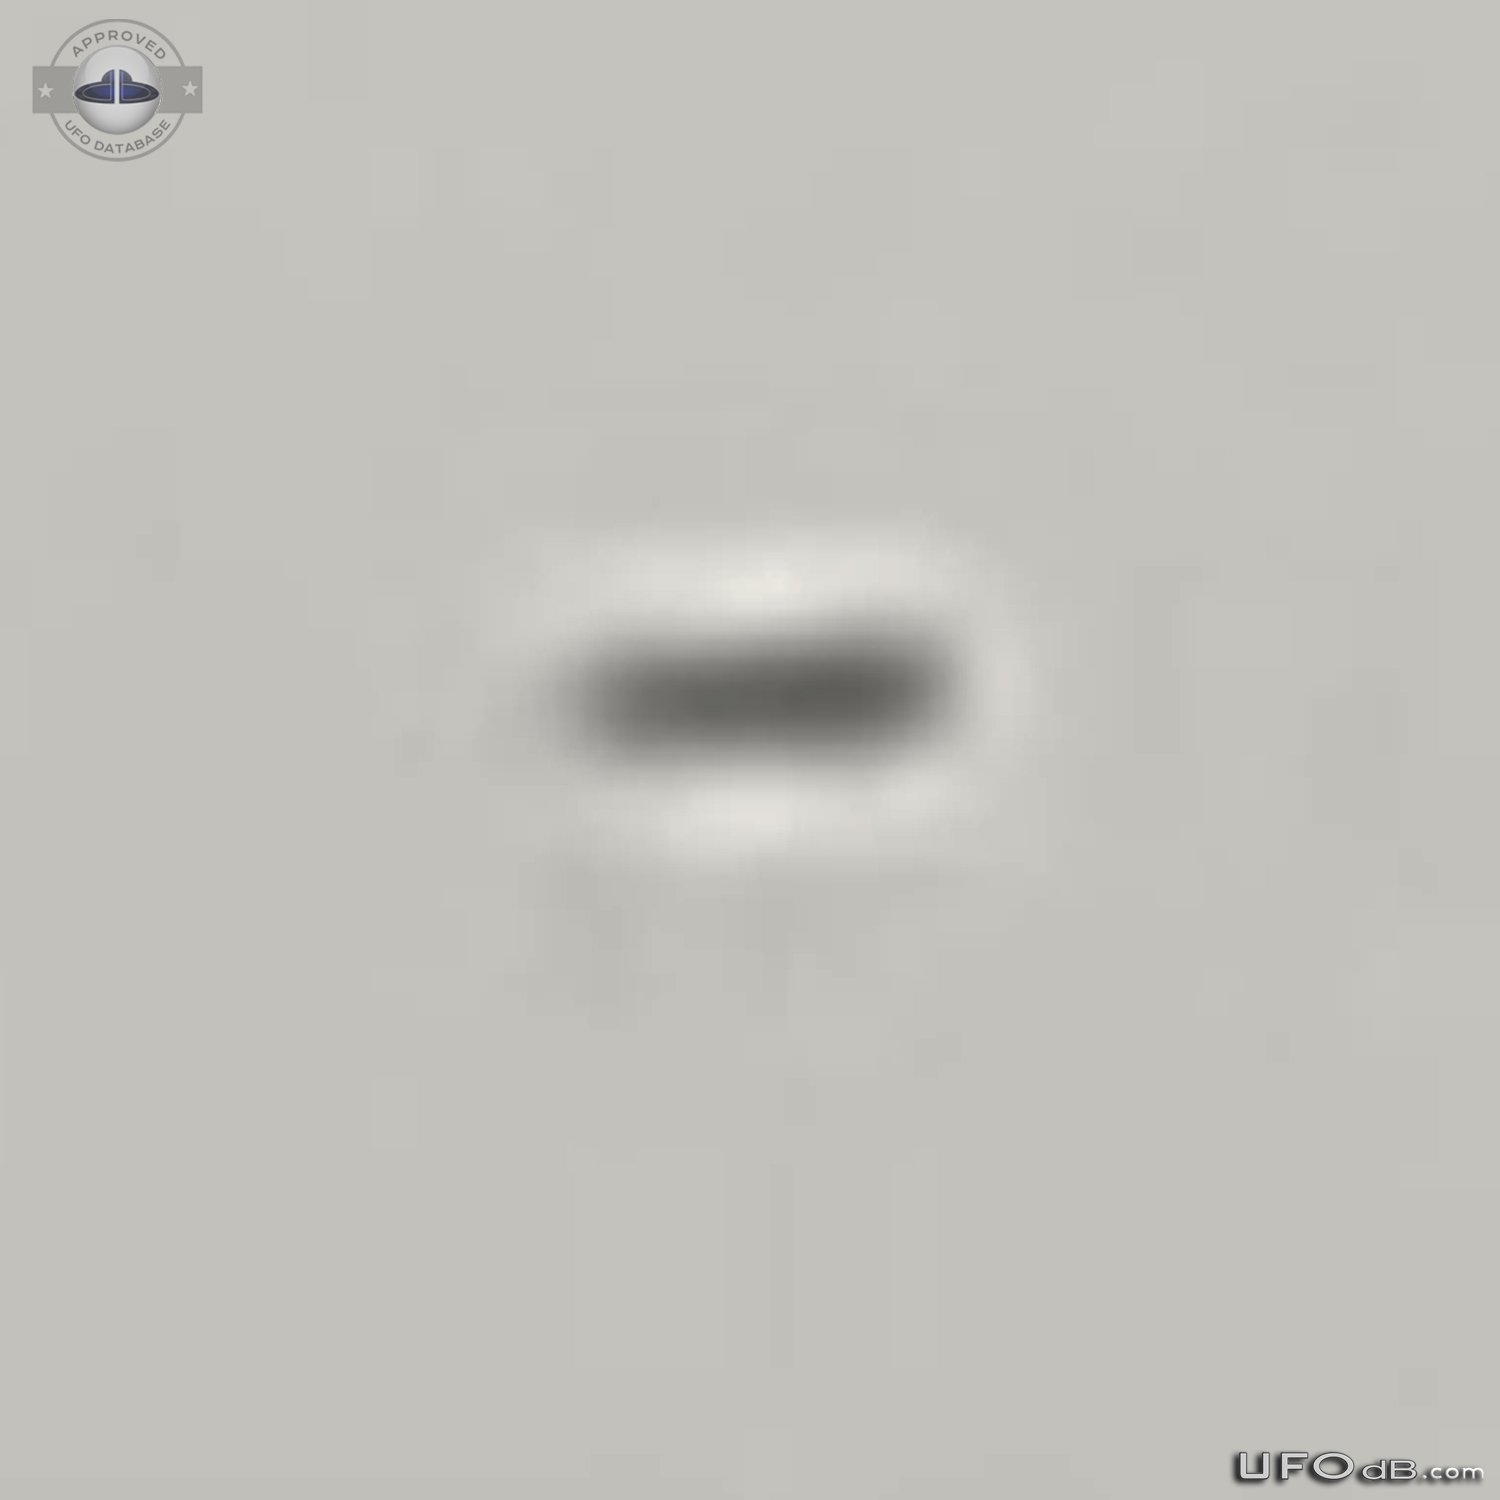 3 disc shaped UFOs seen over Siracusa Sicily Italy january 2014 UFO Picture #599-7